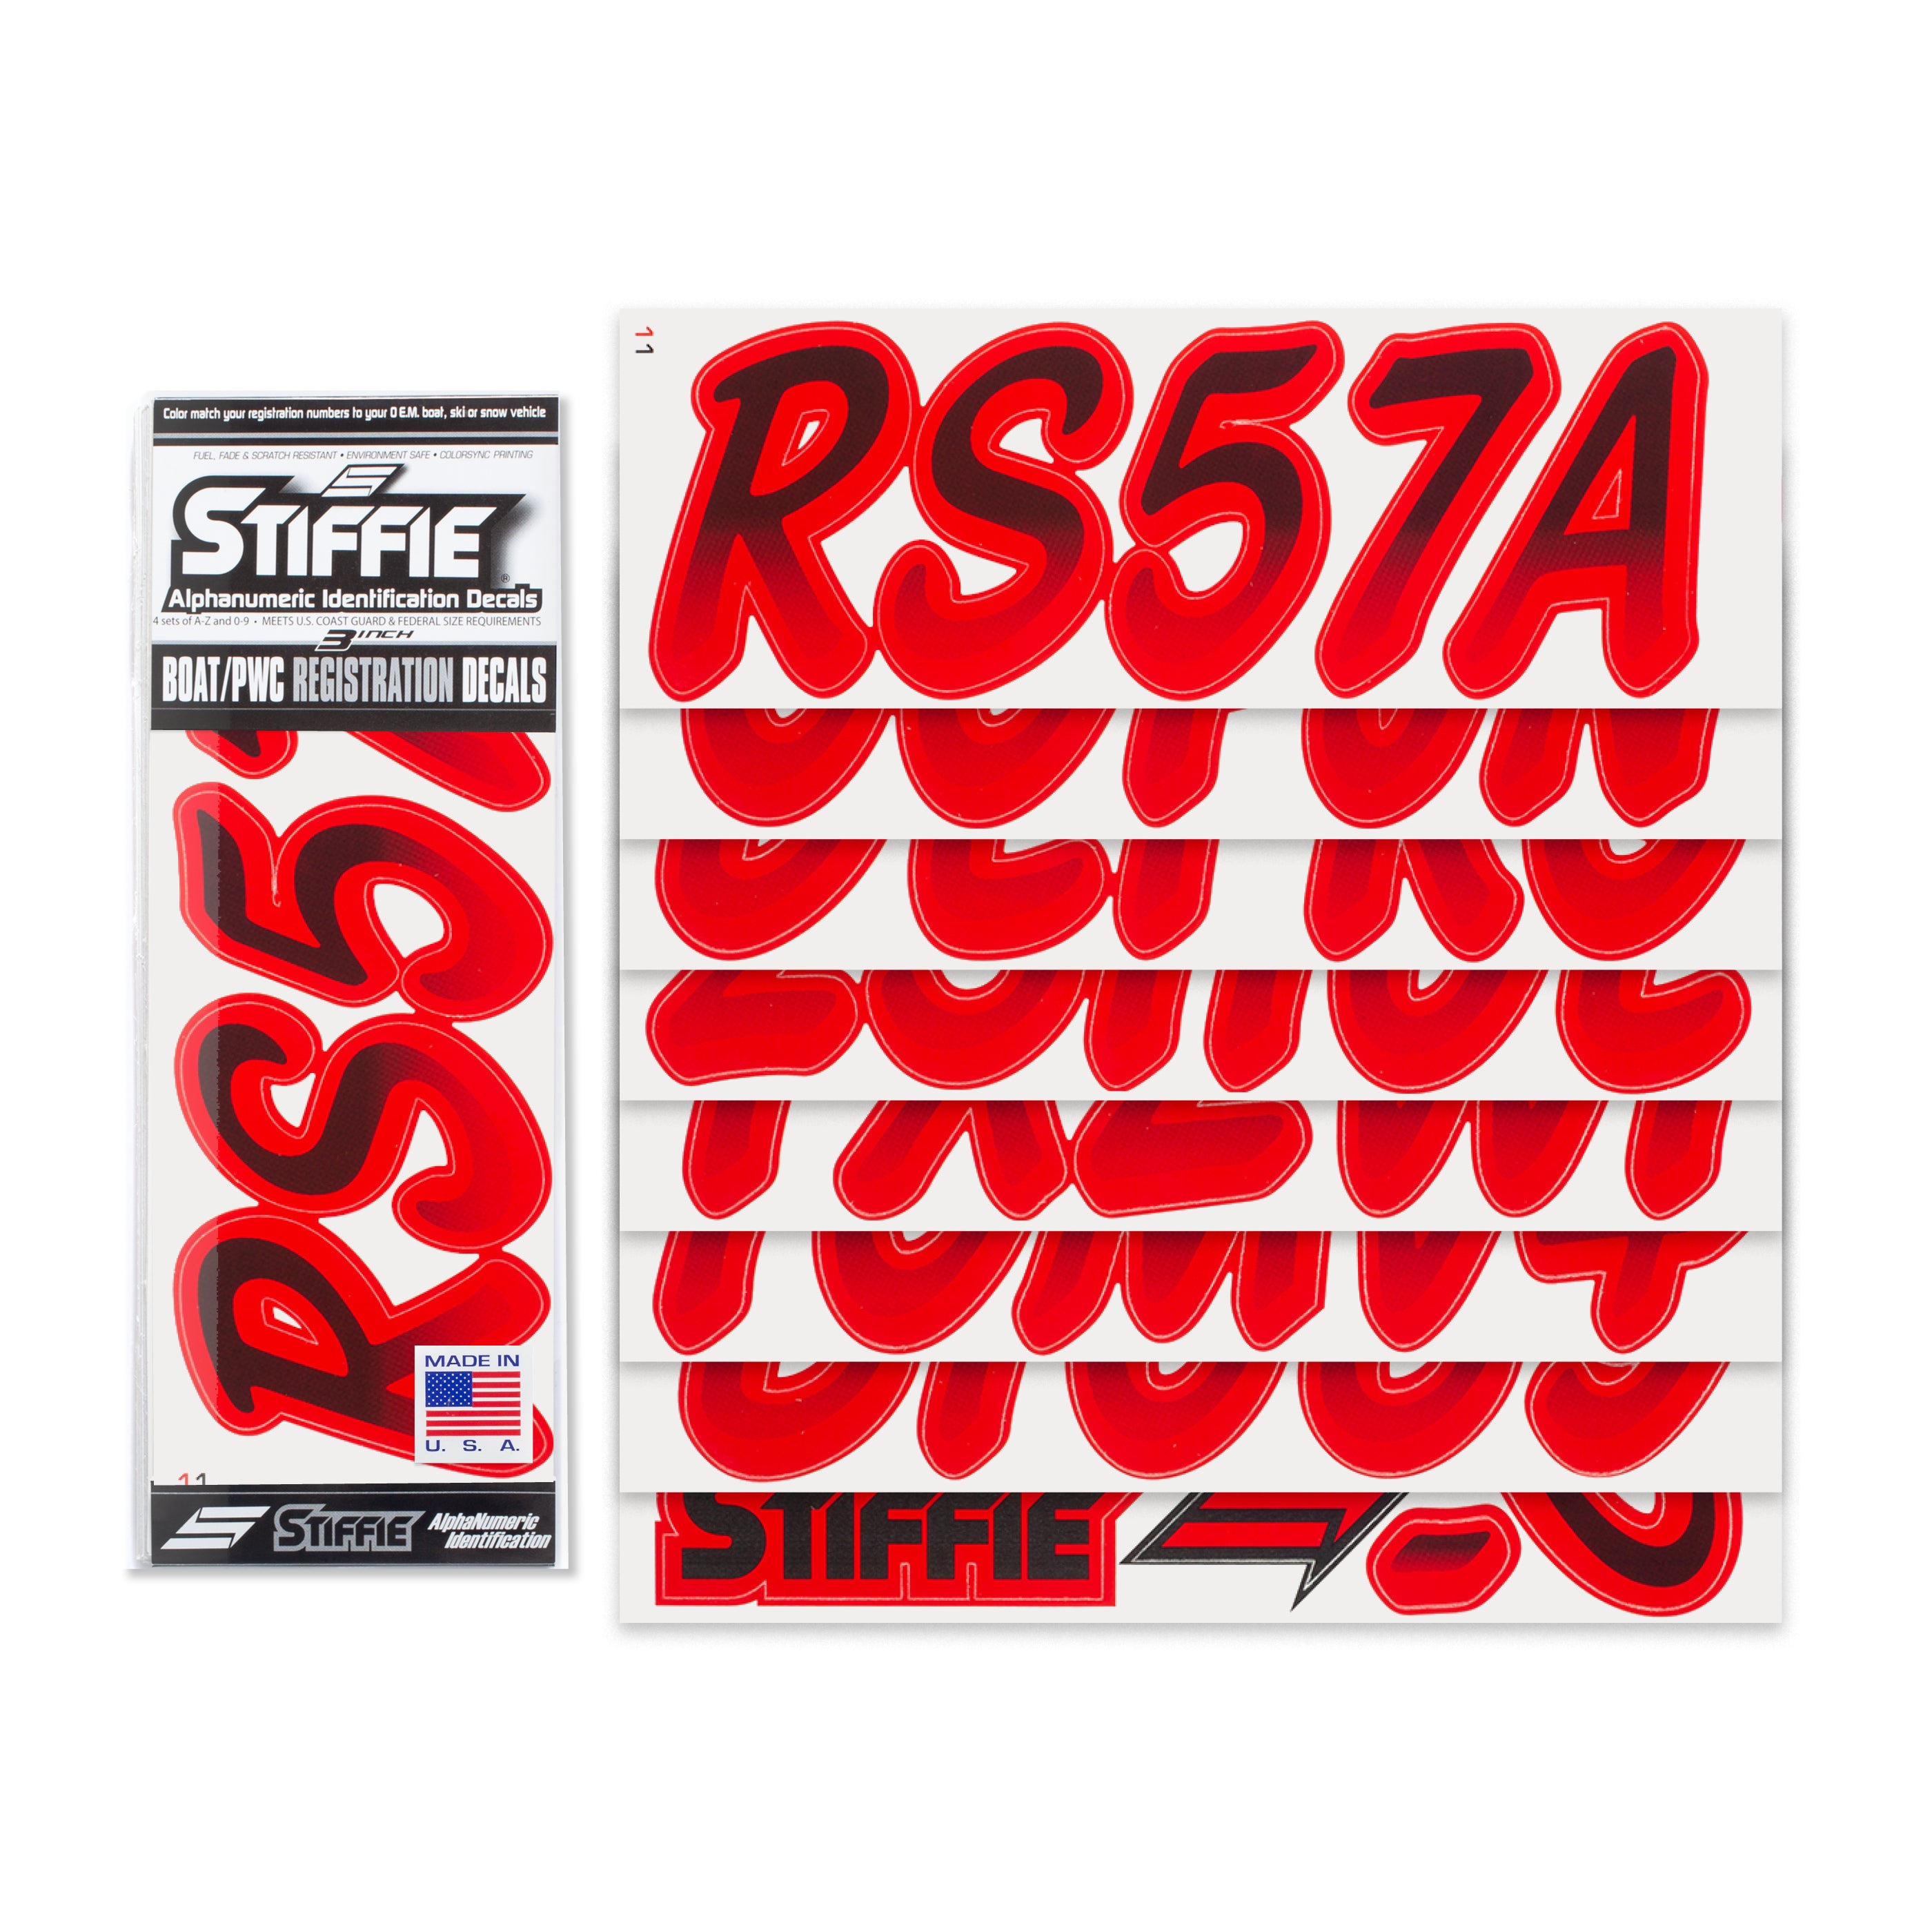 STIFFIE Whipline Black/Red 3" Alpha-Numeric Registration Identification Numbers Stickers Decals for Boats & Personal Watercraft